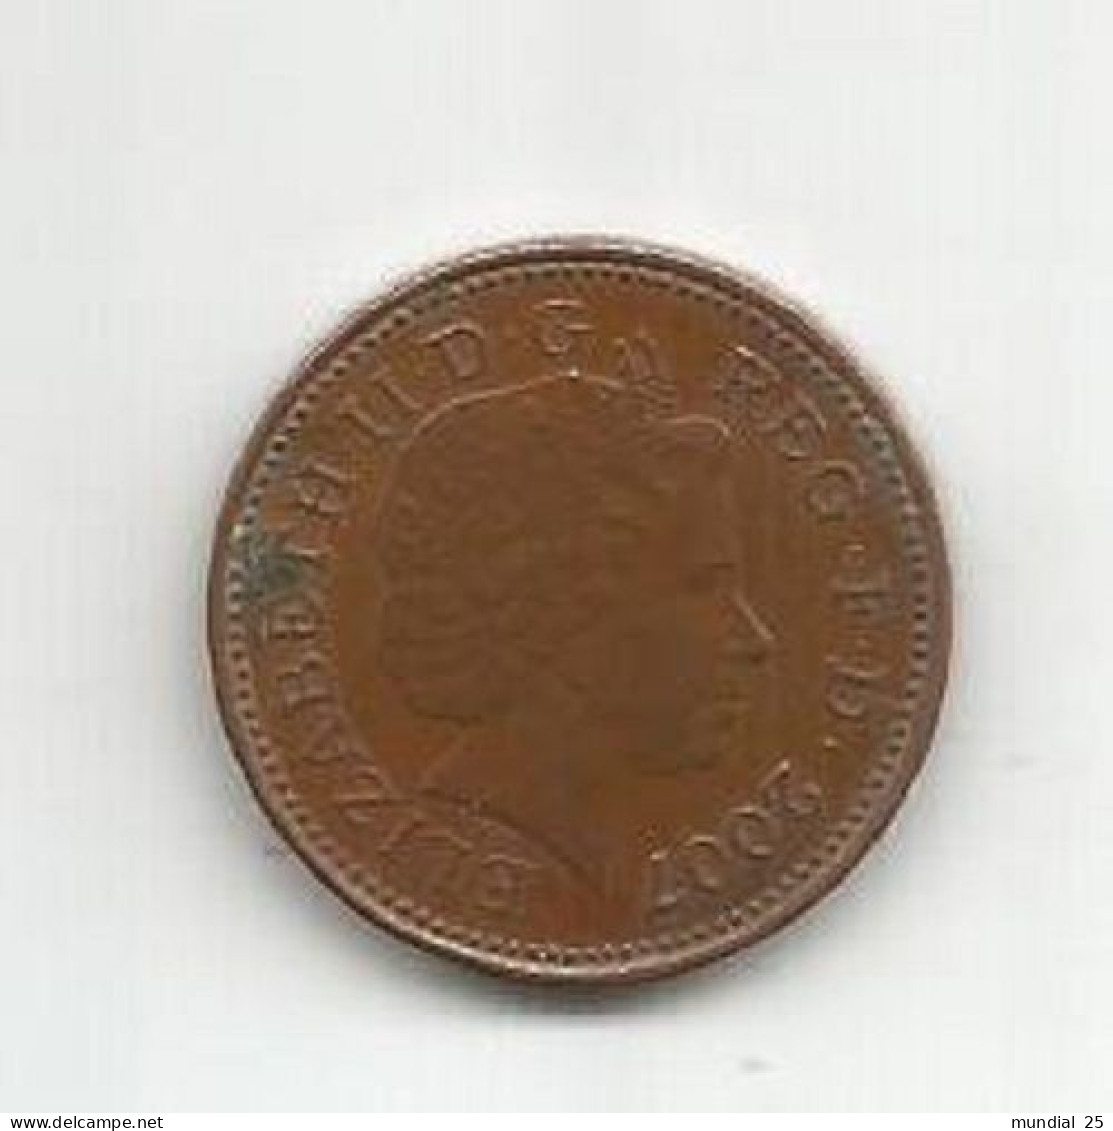 GREAT BRITAIN 1 PENNY 2007 - 1 Penny & 1 New Penny